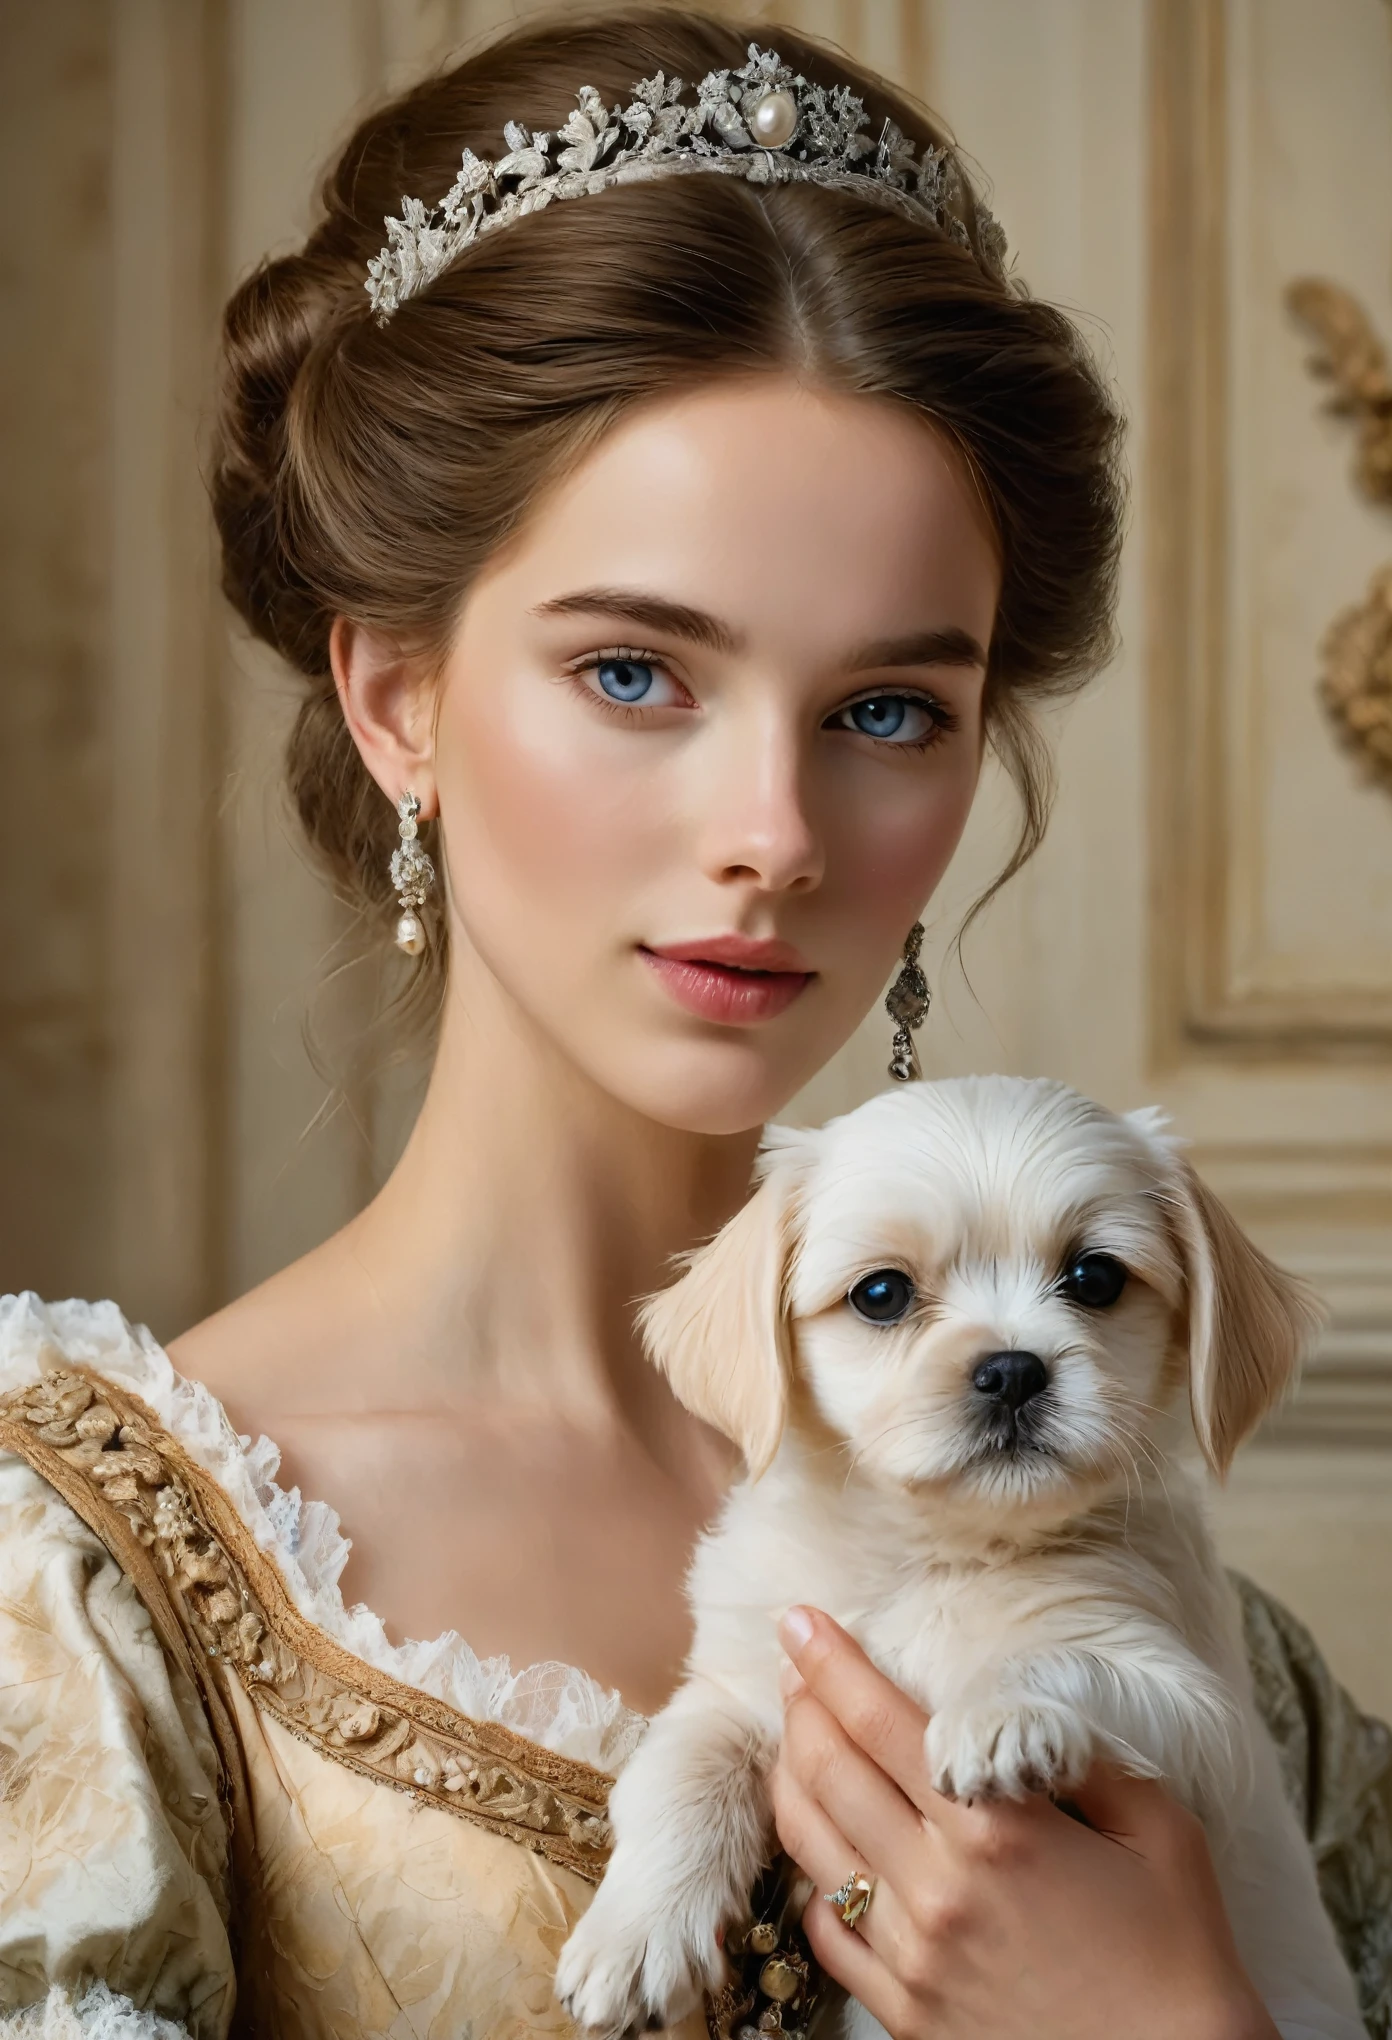 (highres,masterpiece:1.2),(realistic:1.37)"(best quality, highres, ultra-detailed, realistic),(a beautiful) portrait painting (of a) young British noblewoman (holding a) puppy, (set in) 18th century England. (The woman has) stunningly detailed eyes, (with) long eyelashes, (and) beautiful detailed lips. (The artwork is created using) oil painting medium (to achieve a) high-resolution (and) photorealistic (quality). (The scene is adorned with) velvety dresses (and) intricate lace details. (The art style exhibits) a mixture of classical and romantic elements. (The color palette leans towards) warm tones, (with) soft lighting (emphasizing) the graceful features of the lady. (The final artwork) displays a perfect blend of elegance, charm, and innocence. wearing a ring, beautiful dreamy eyes, the most breautiful face in the world, 18 years old,　